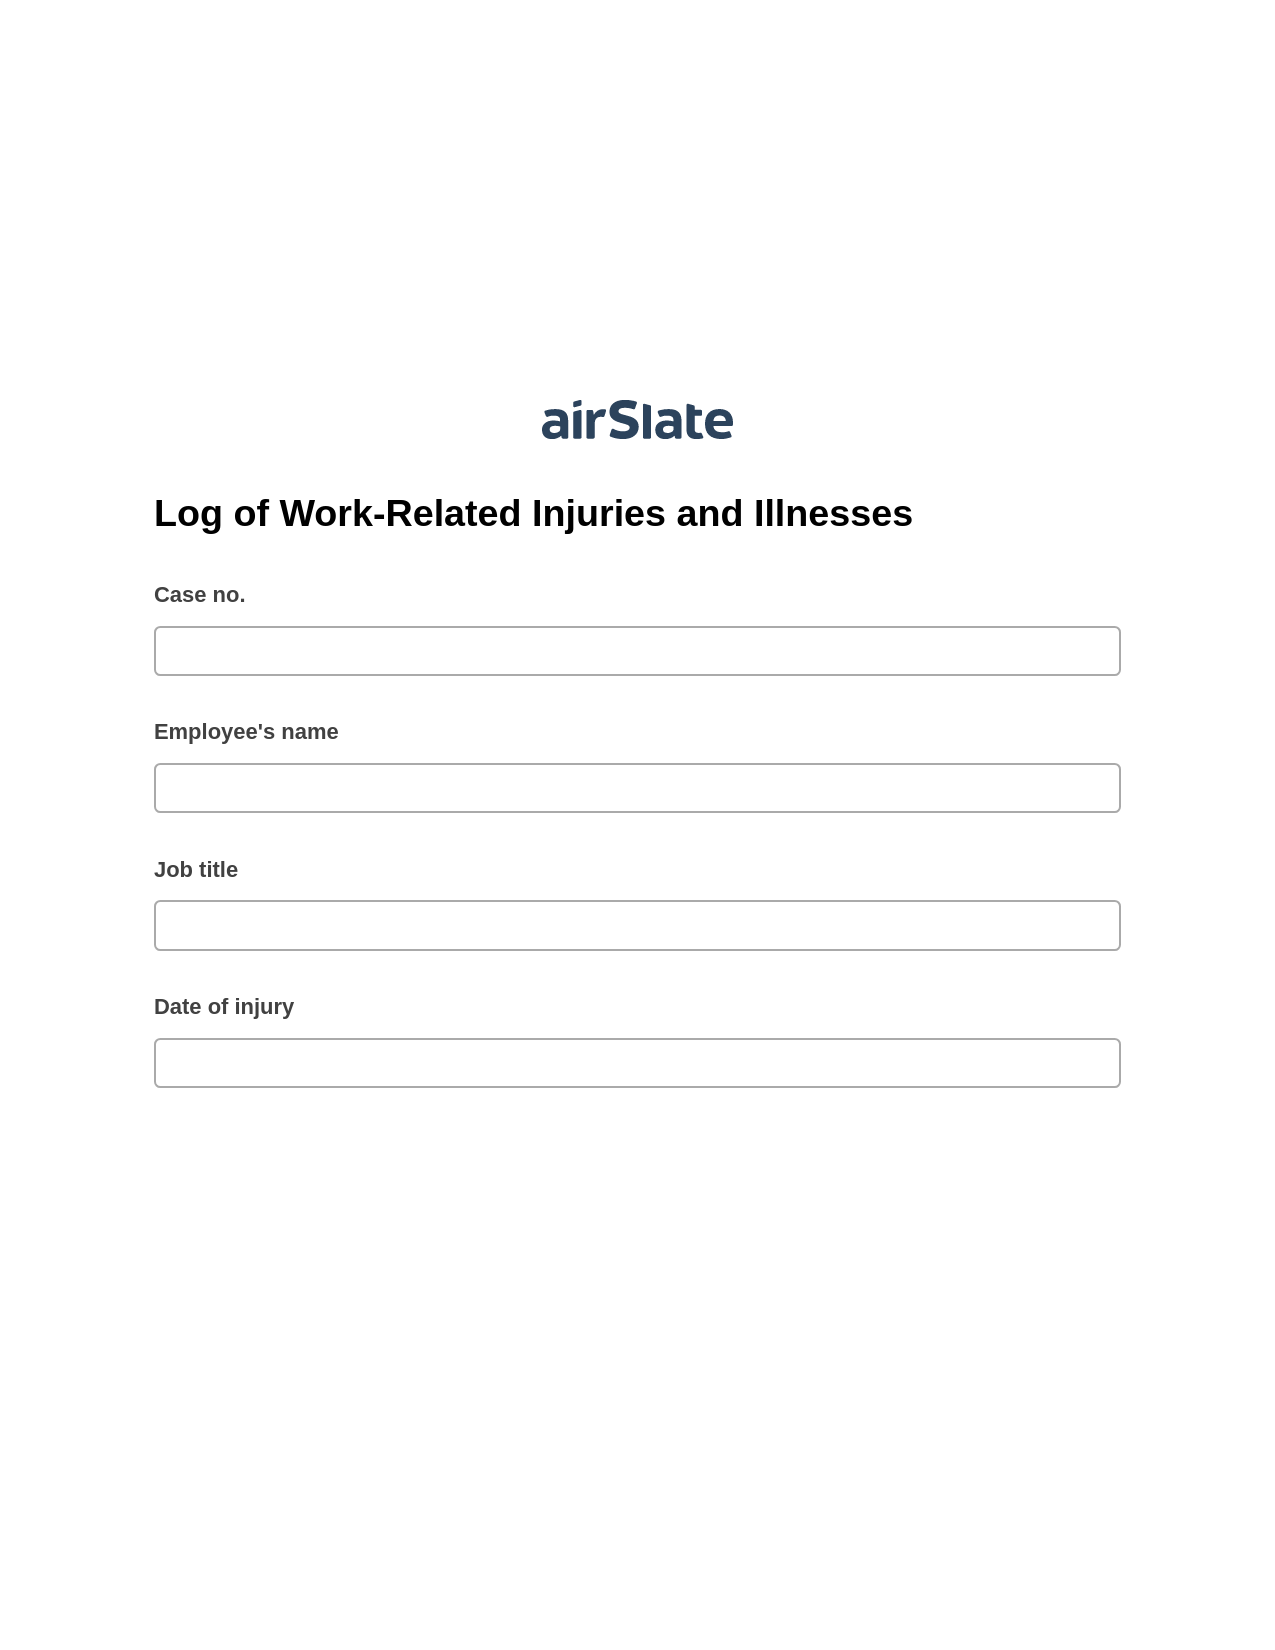 Multirole Log of Work-Related Injuries and Illnesses Pre-fill from Salesforce Records with SOQL Bot, Pre-fill with Custom Data Bot, Export to Smartsheet